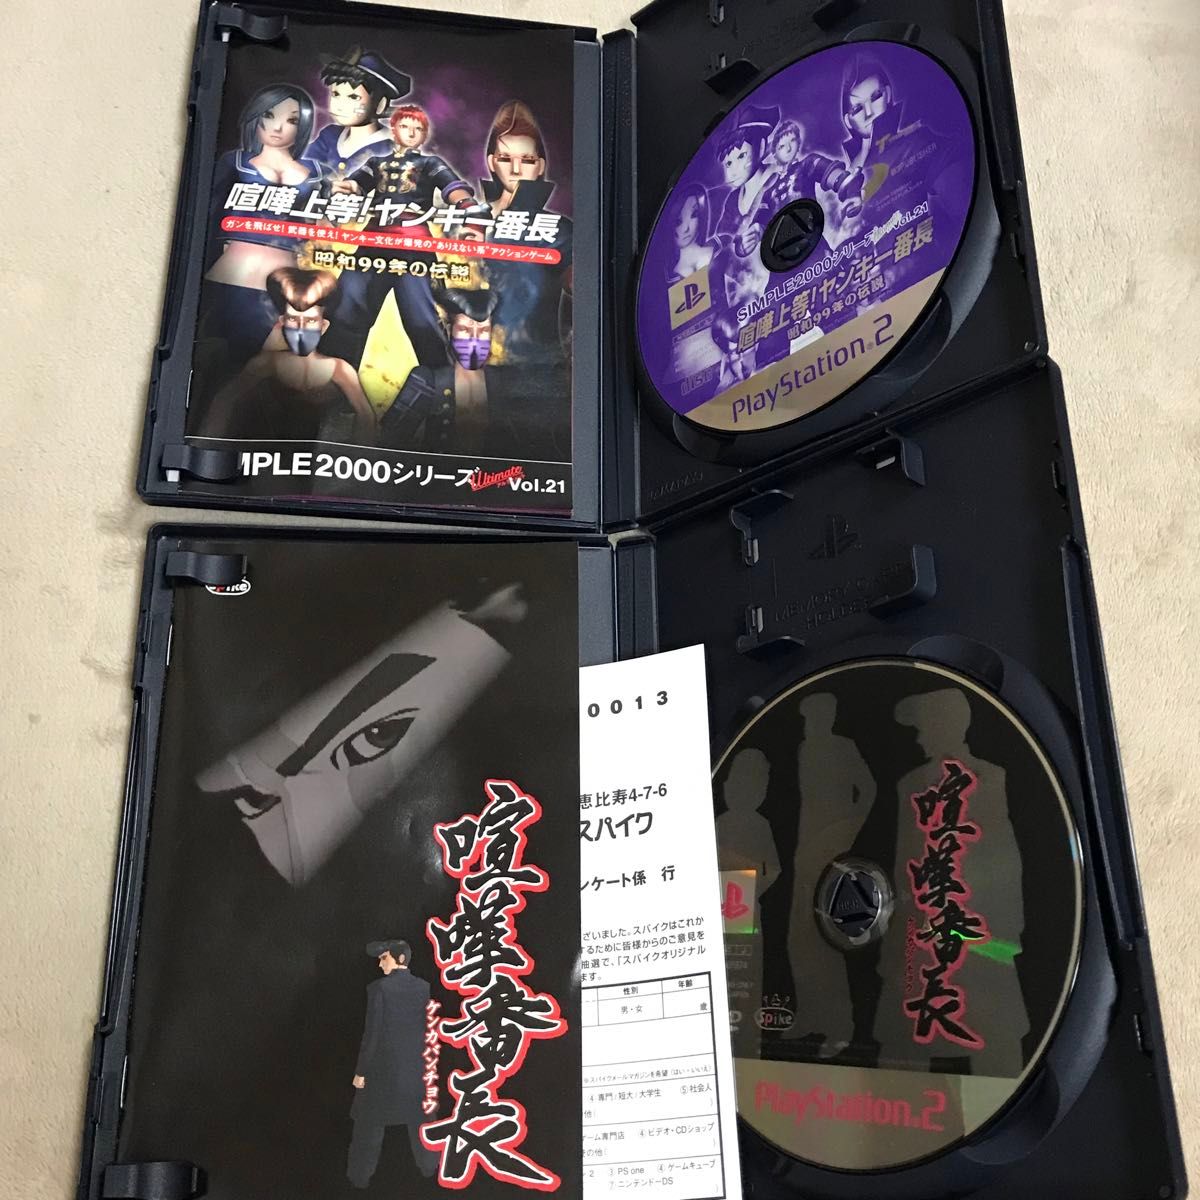 PS2ソフト　喧嘩番長　喧嘩上等！ヤンキー番長　ＳＩＭＰＬＥ２０００Ｕｌｔｉｍａｔｅ　2本セット